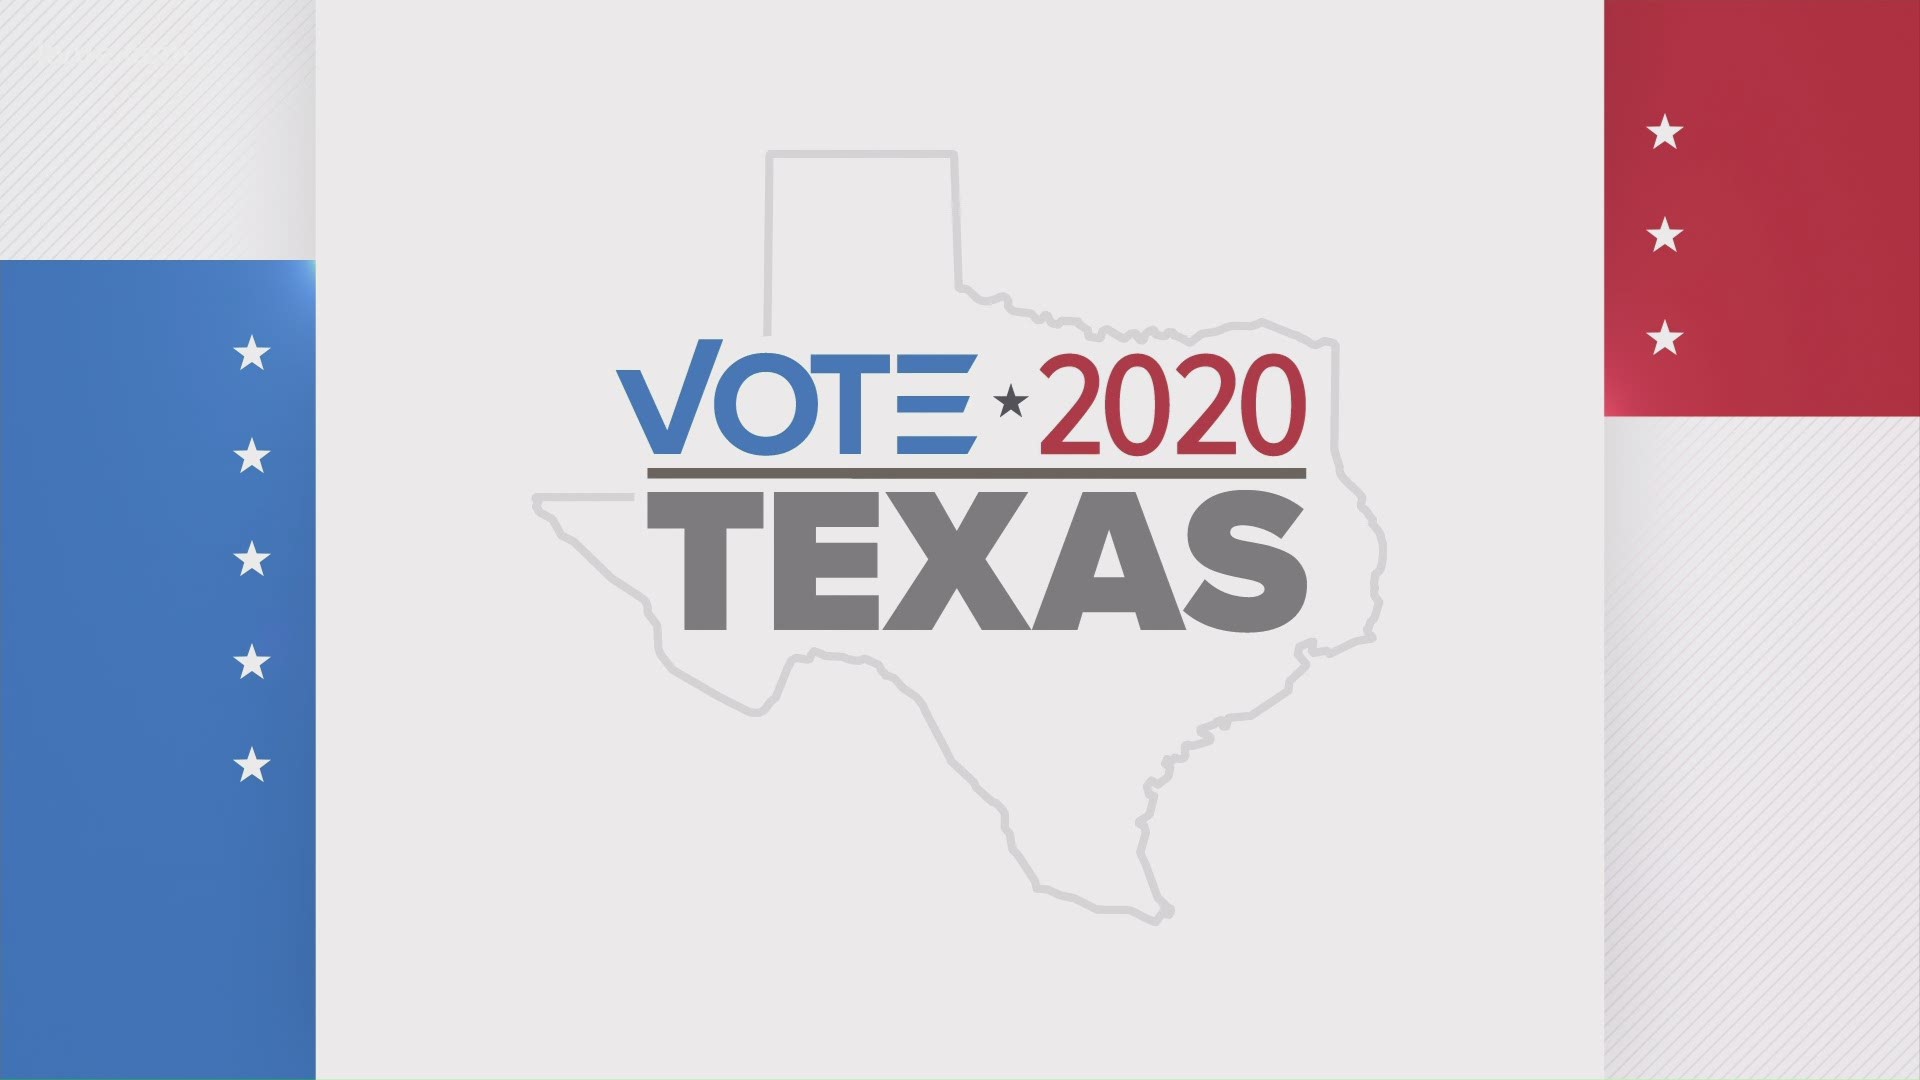 Texas is shaping up to become a key player on the national stage. With all of the state's growth, could Texas be a battleground state in 2020?